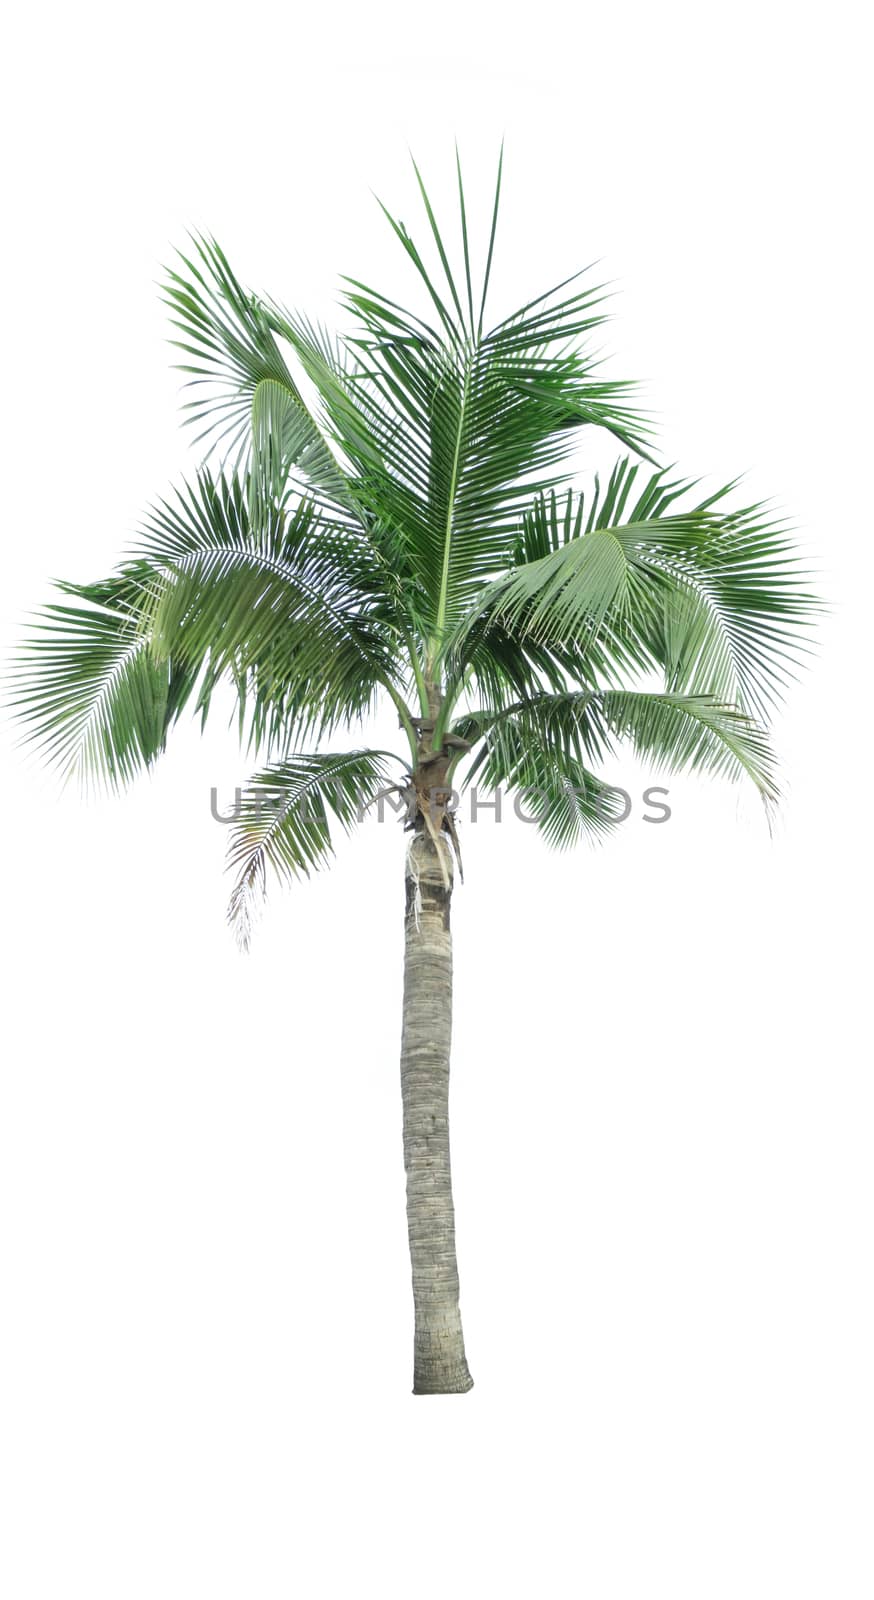 Coconut tree isolated on white background used for advertising decorative architecture. Summer and beach concept by Fahroni